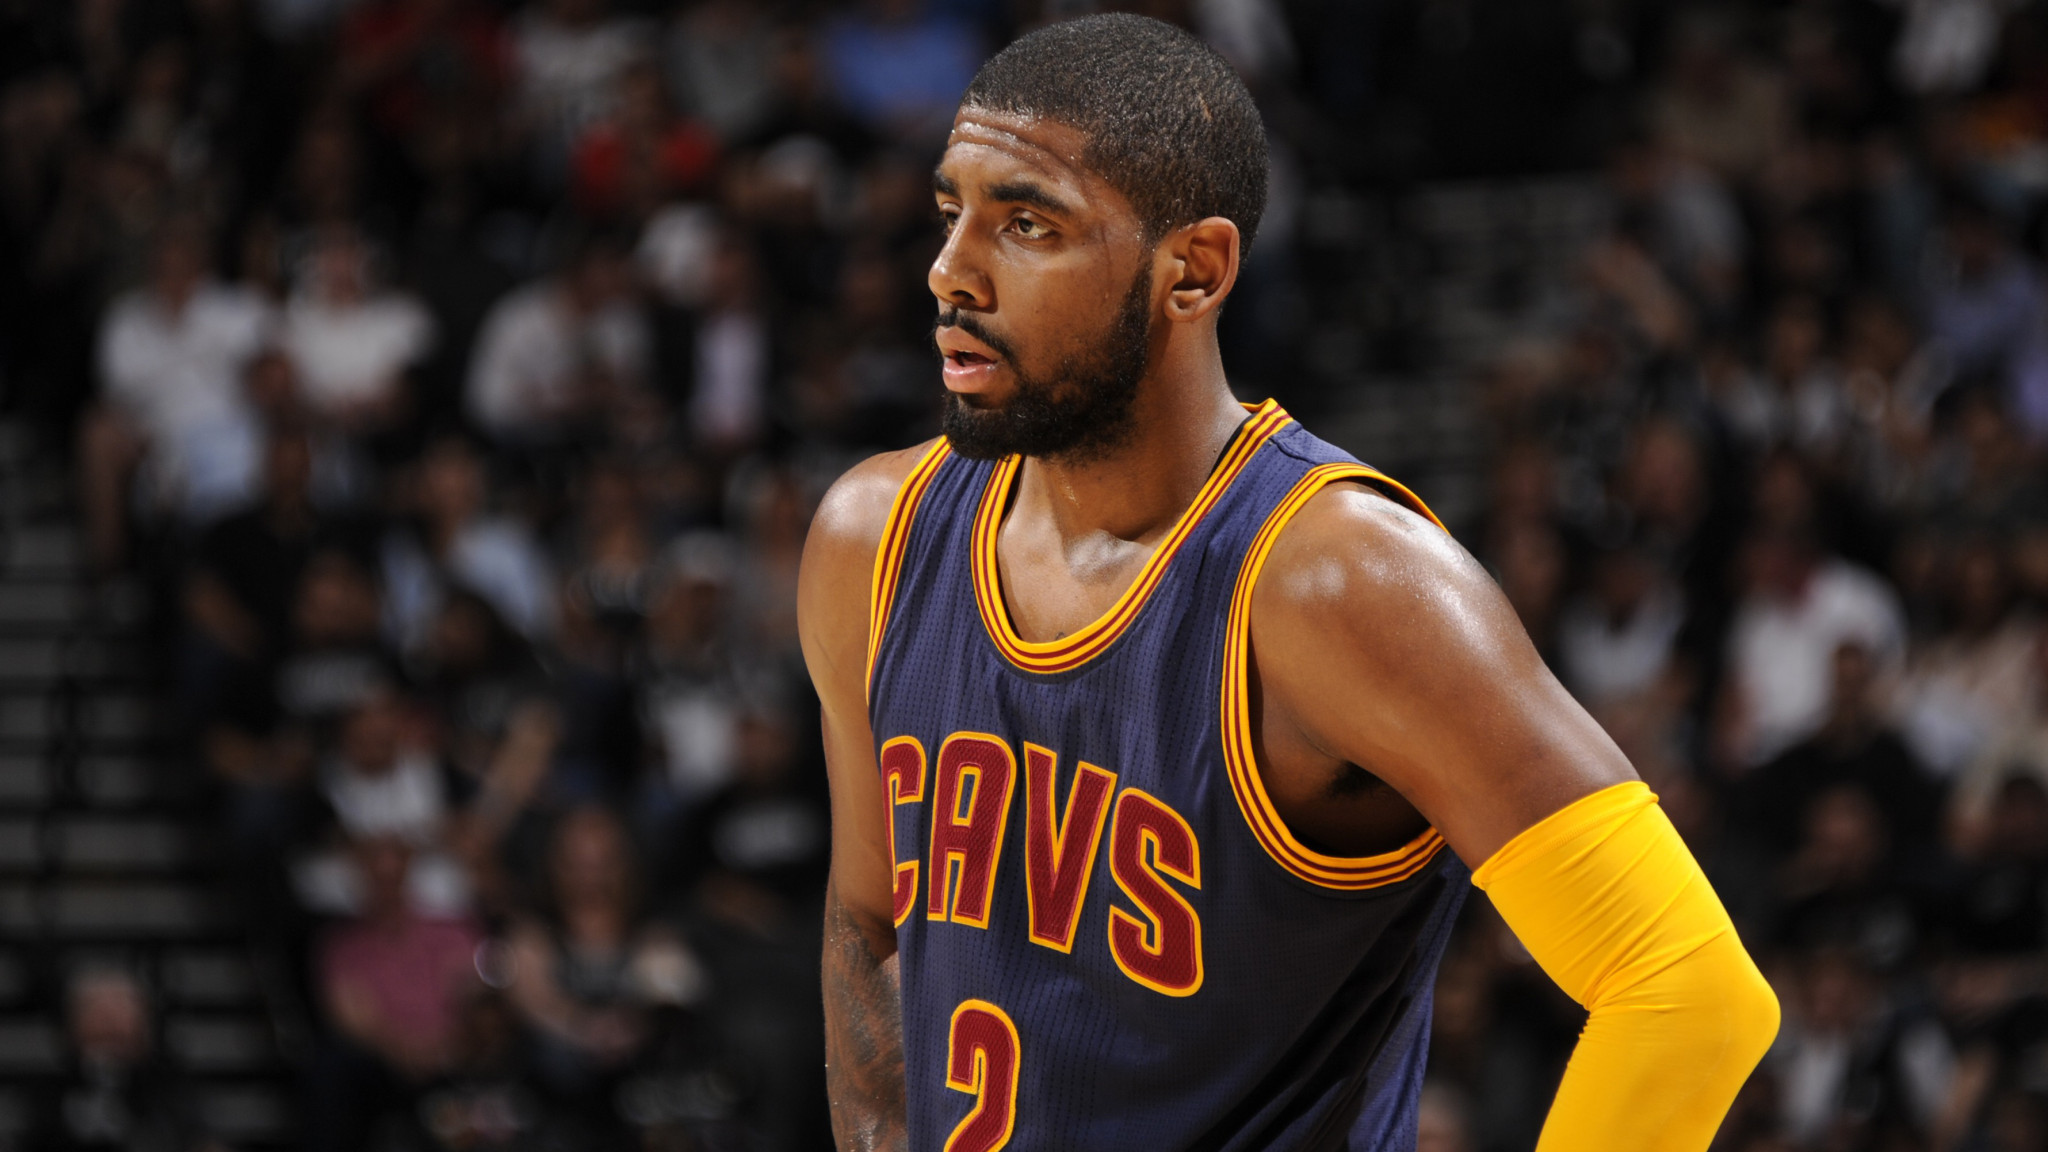 Kyrie Irving #22